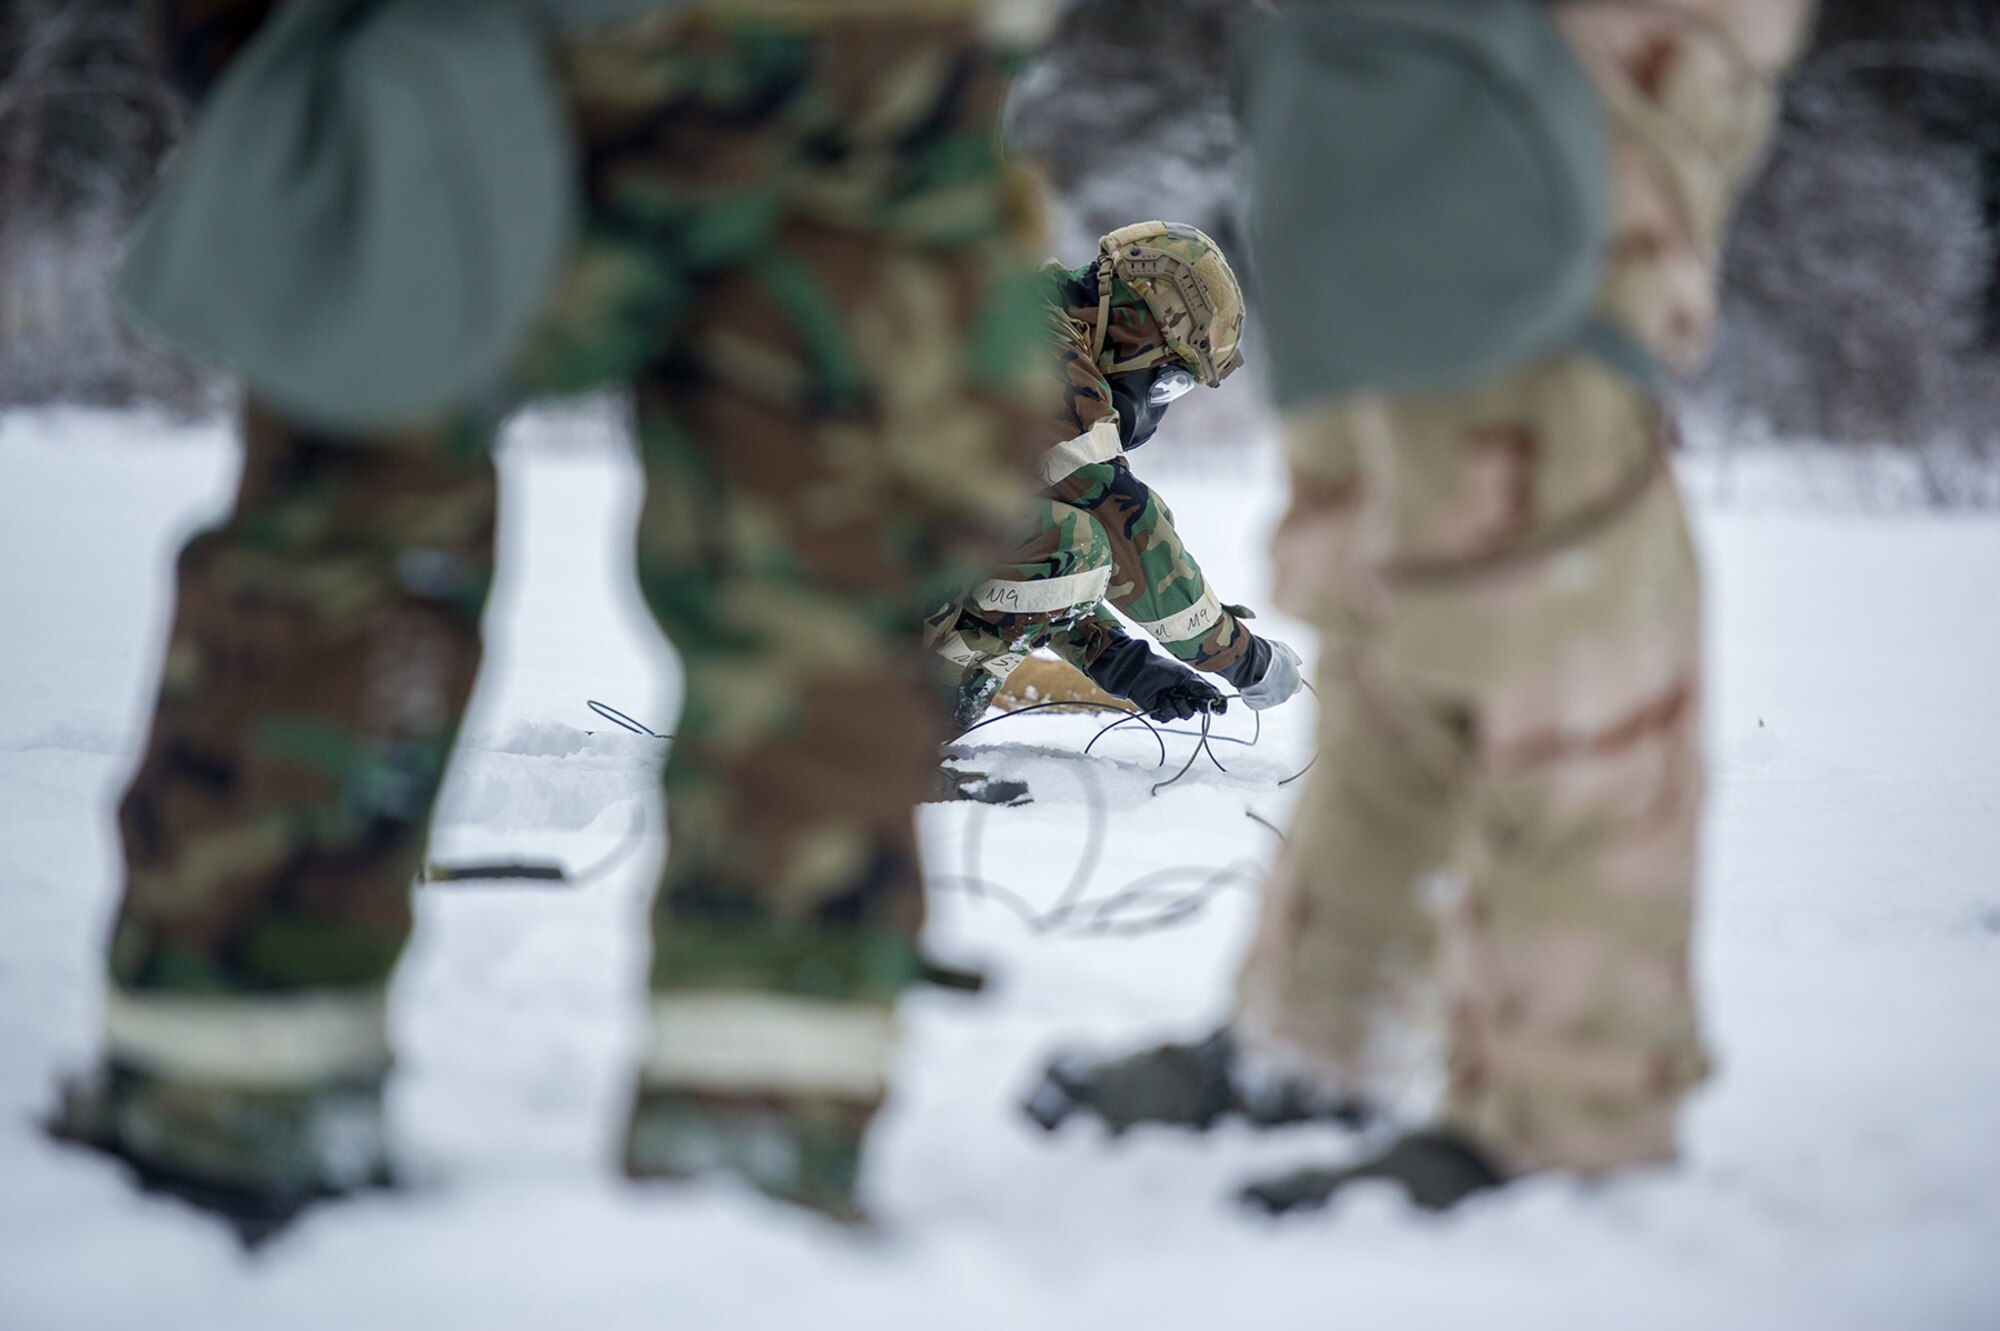 An Airmen assigned to the 673d Civil Engineer Squadron, Explosives Ordinance Disposal Flight, lays a charge in the snow before a live-fire demolitions exercise in Mission Oriented Protective Posture 4 on Joint Base Elmendorf-Richardson, Alaska, Feb.14, 2018.  The Airmen were conducting EOD training in a simulated chemical weapons contaminated environment.